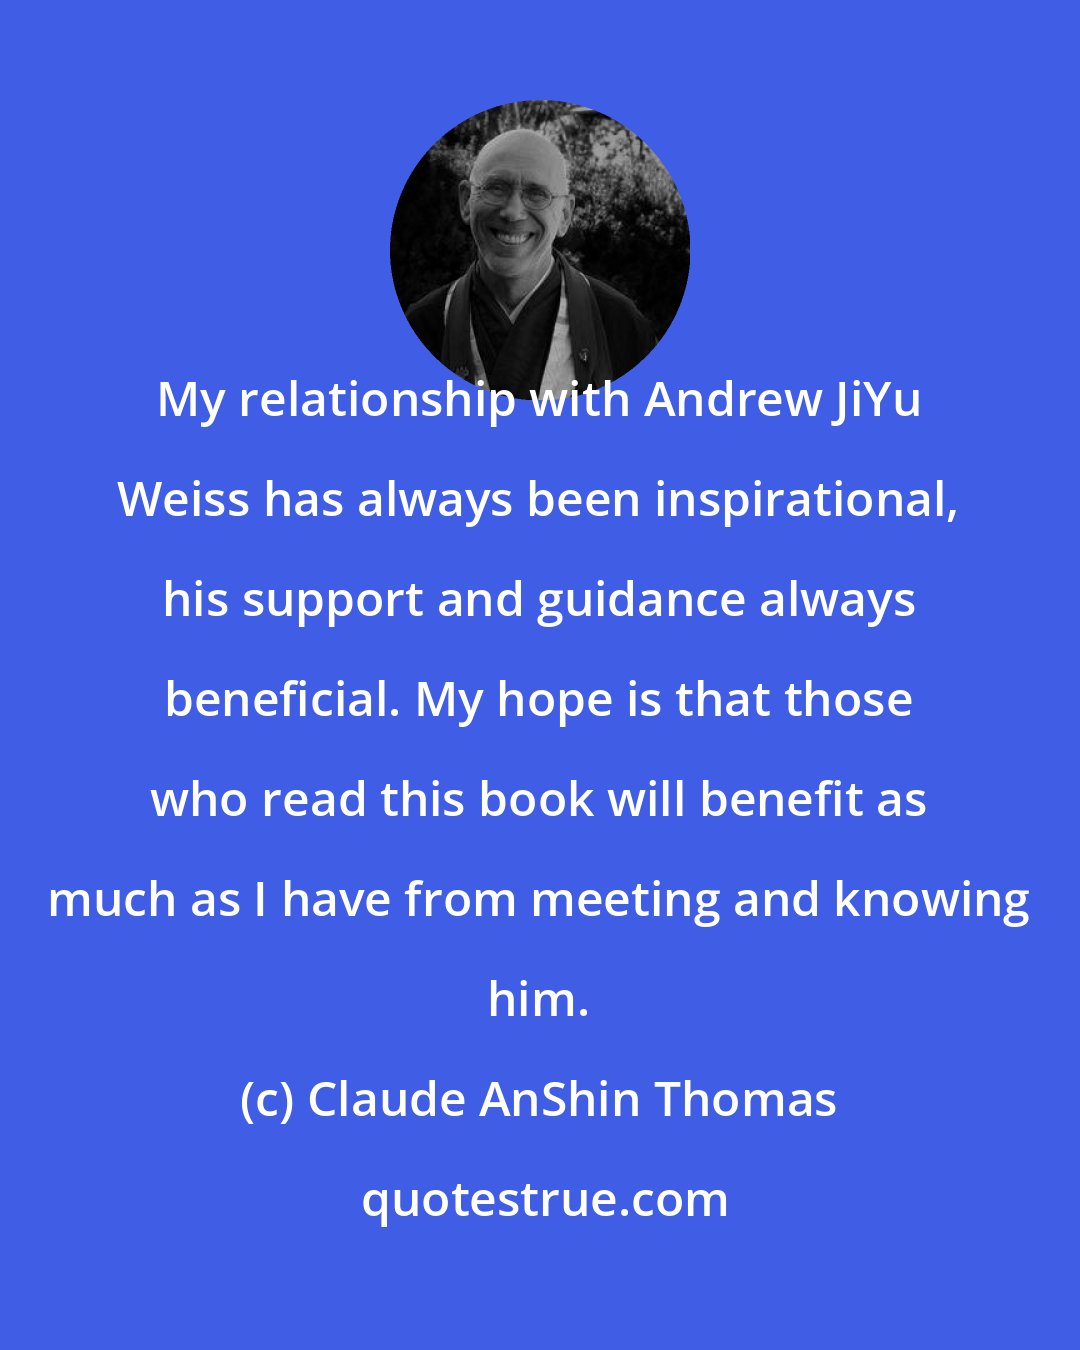 Claude AnShin Thomas: My relationship with Andrew JiYu Weiss has always been inspirational, his support and guidance always beneficial. My hope is that those who read this book will benefit as much as I have from meeting and knowing him.